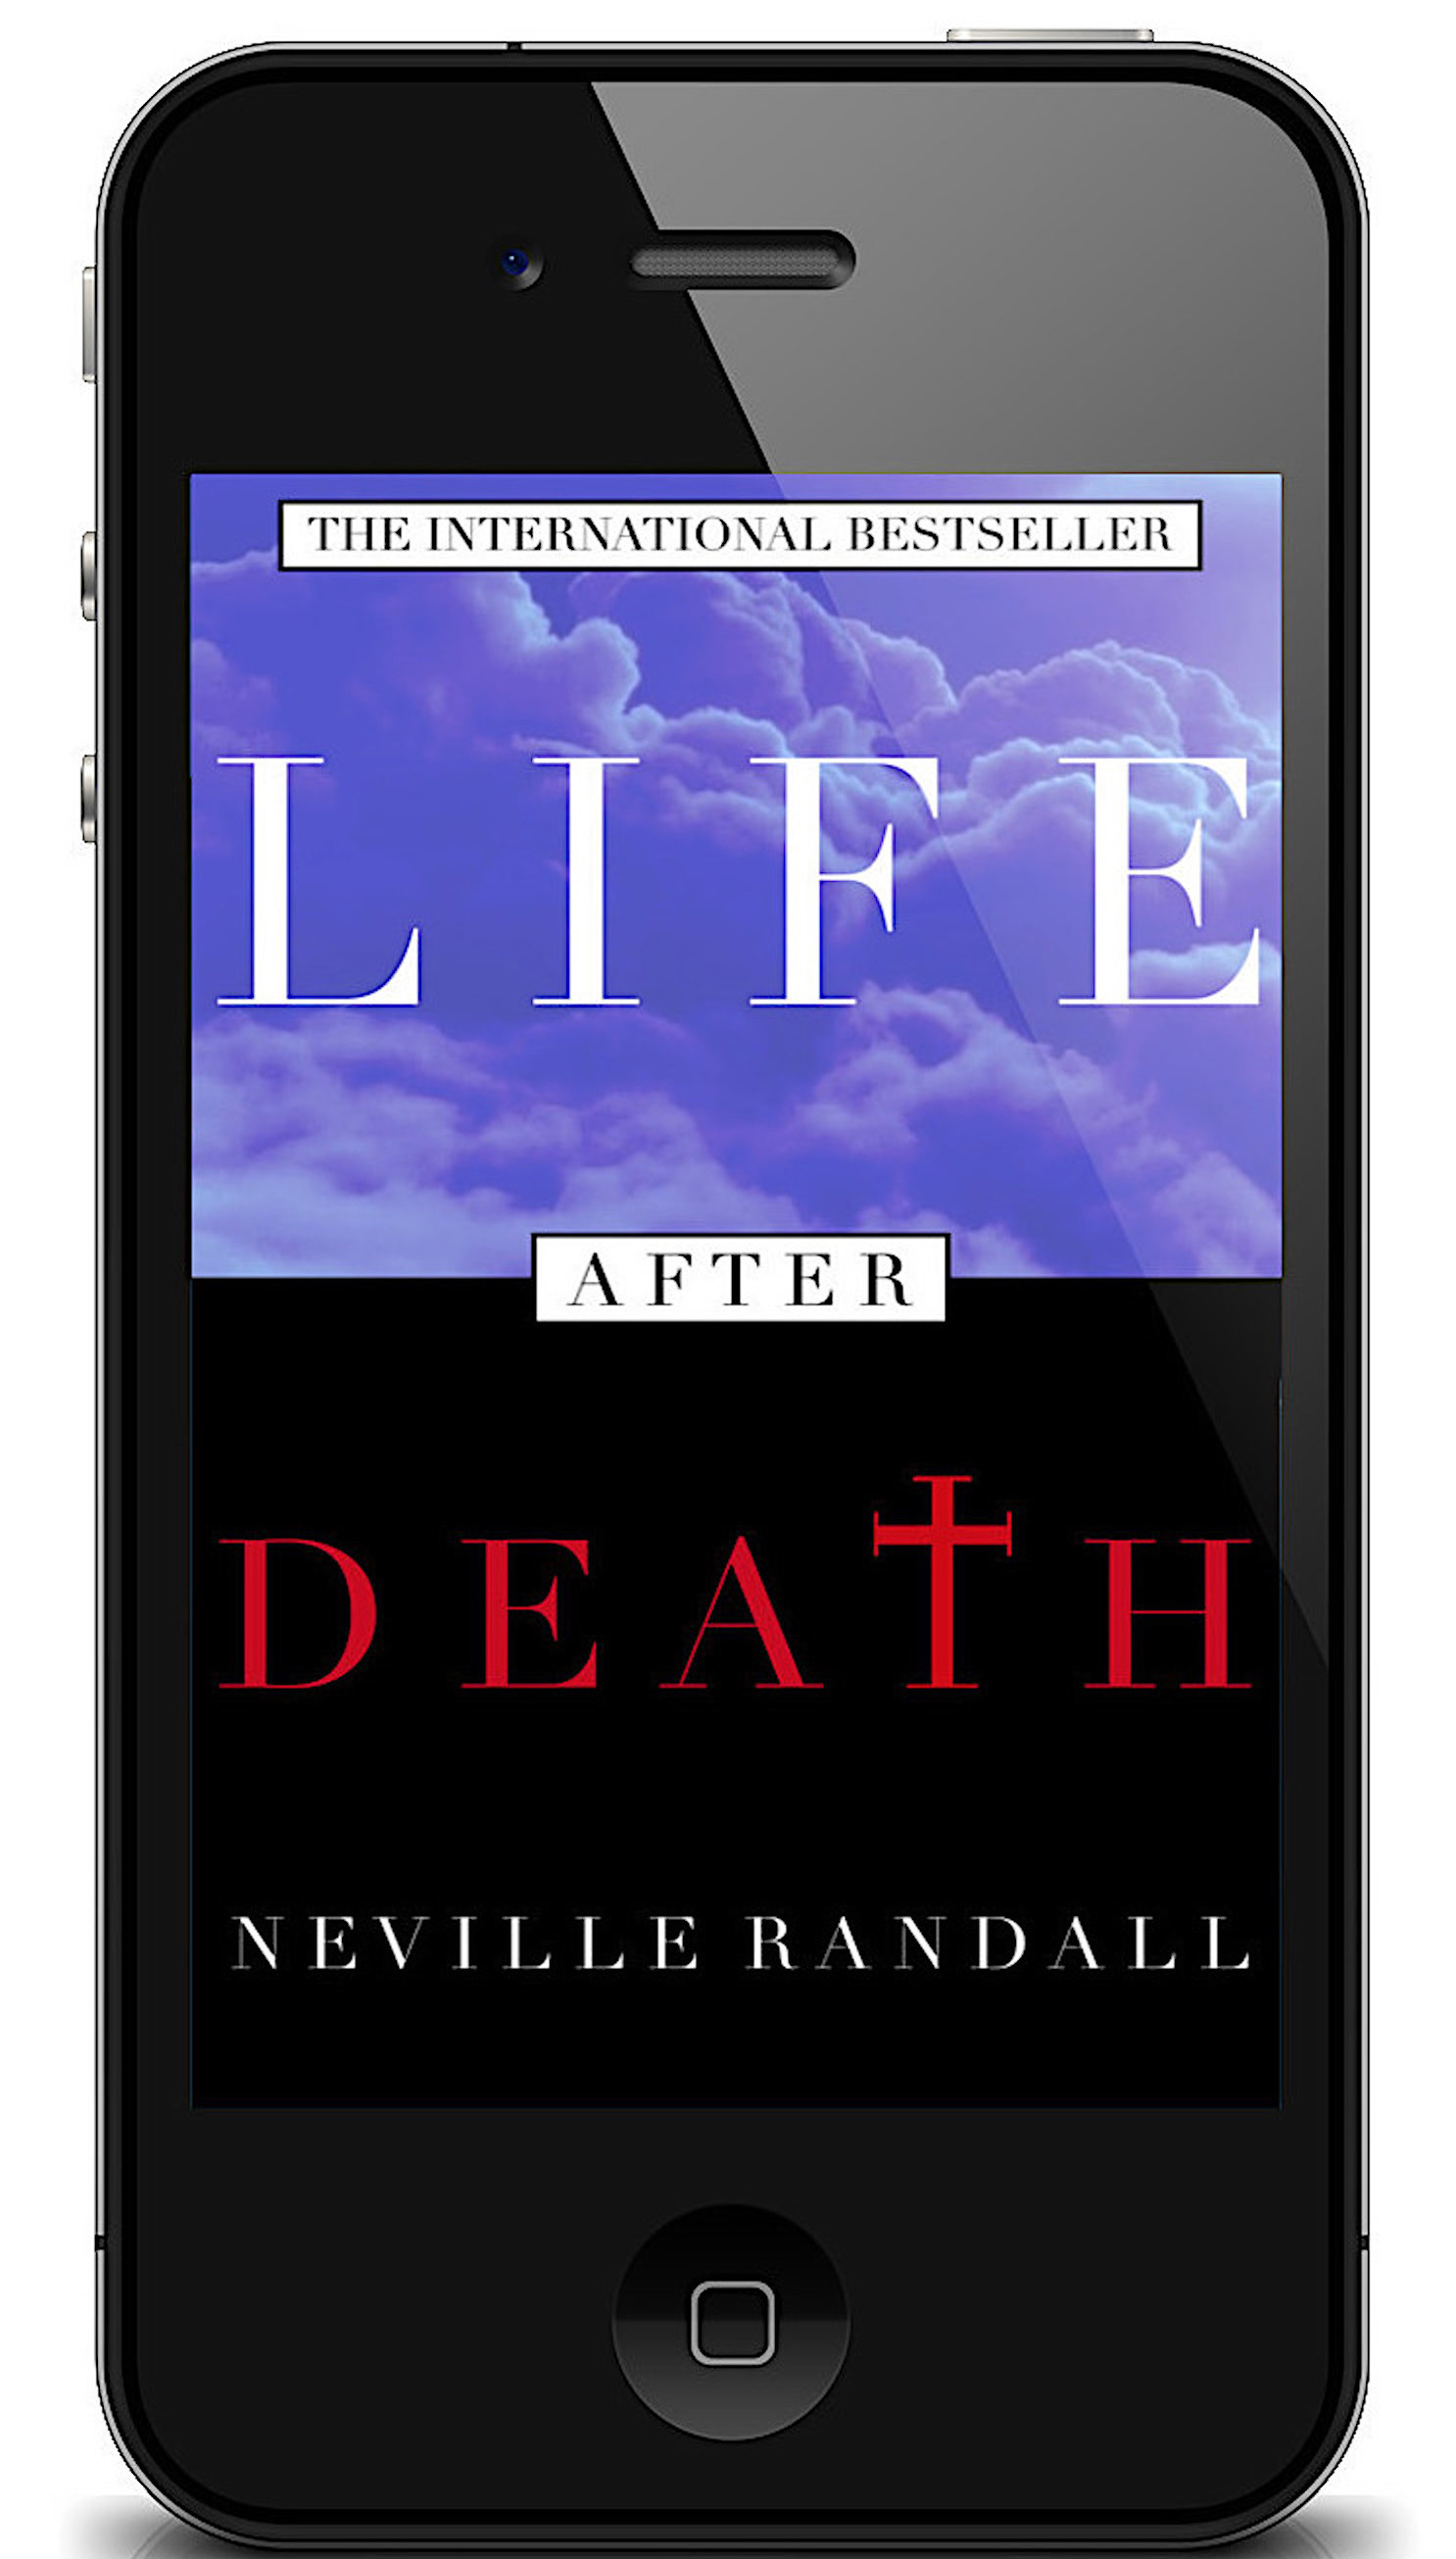 320-life-after-death-phone-pic.jpg